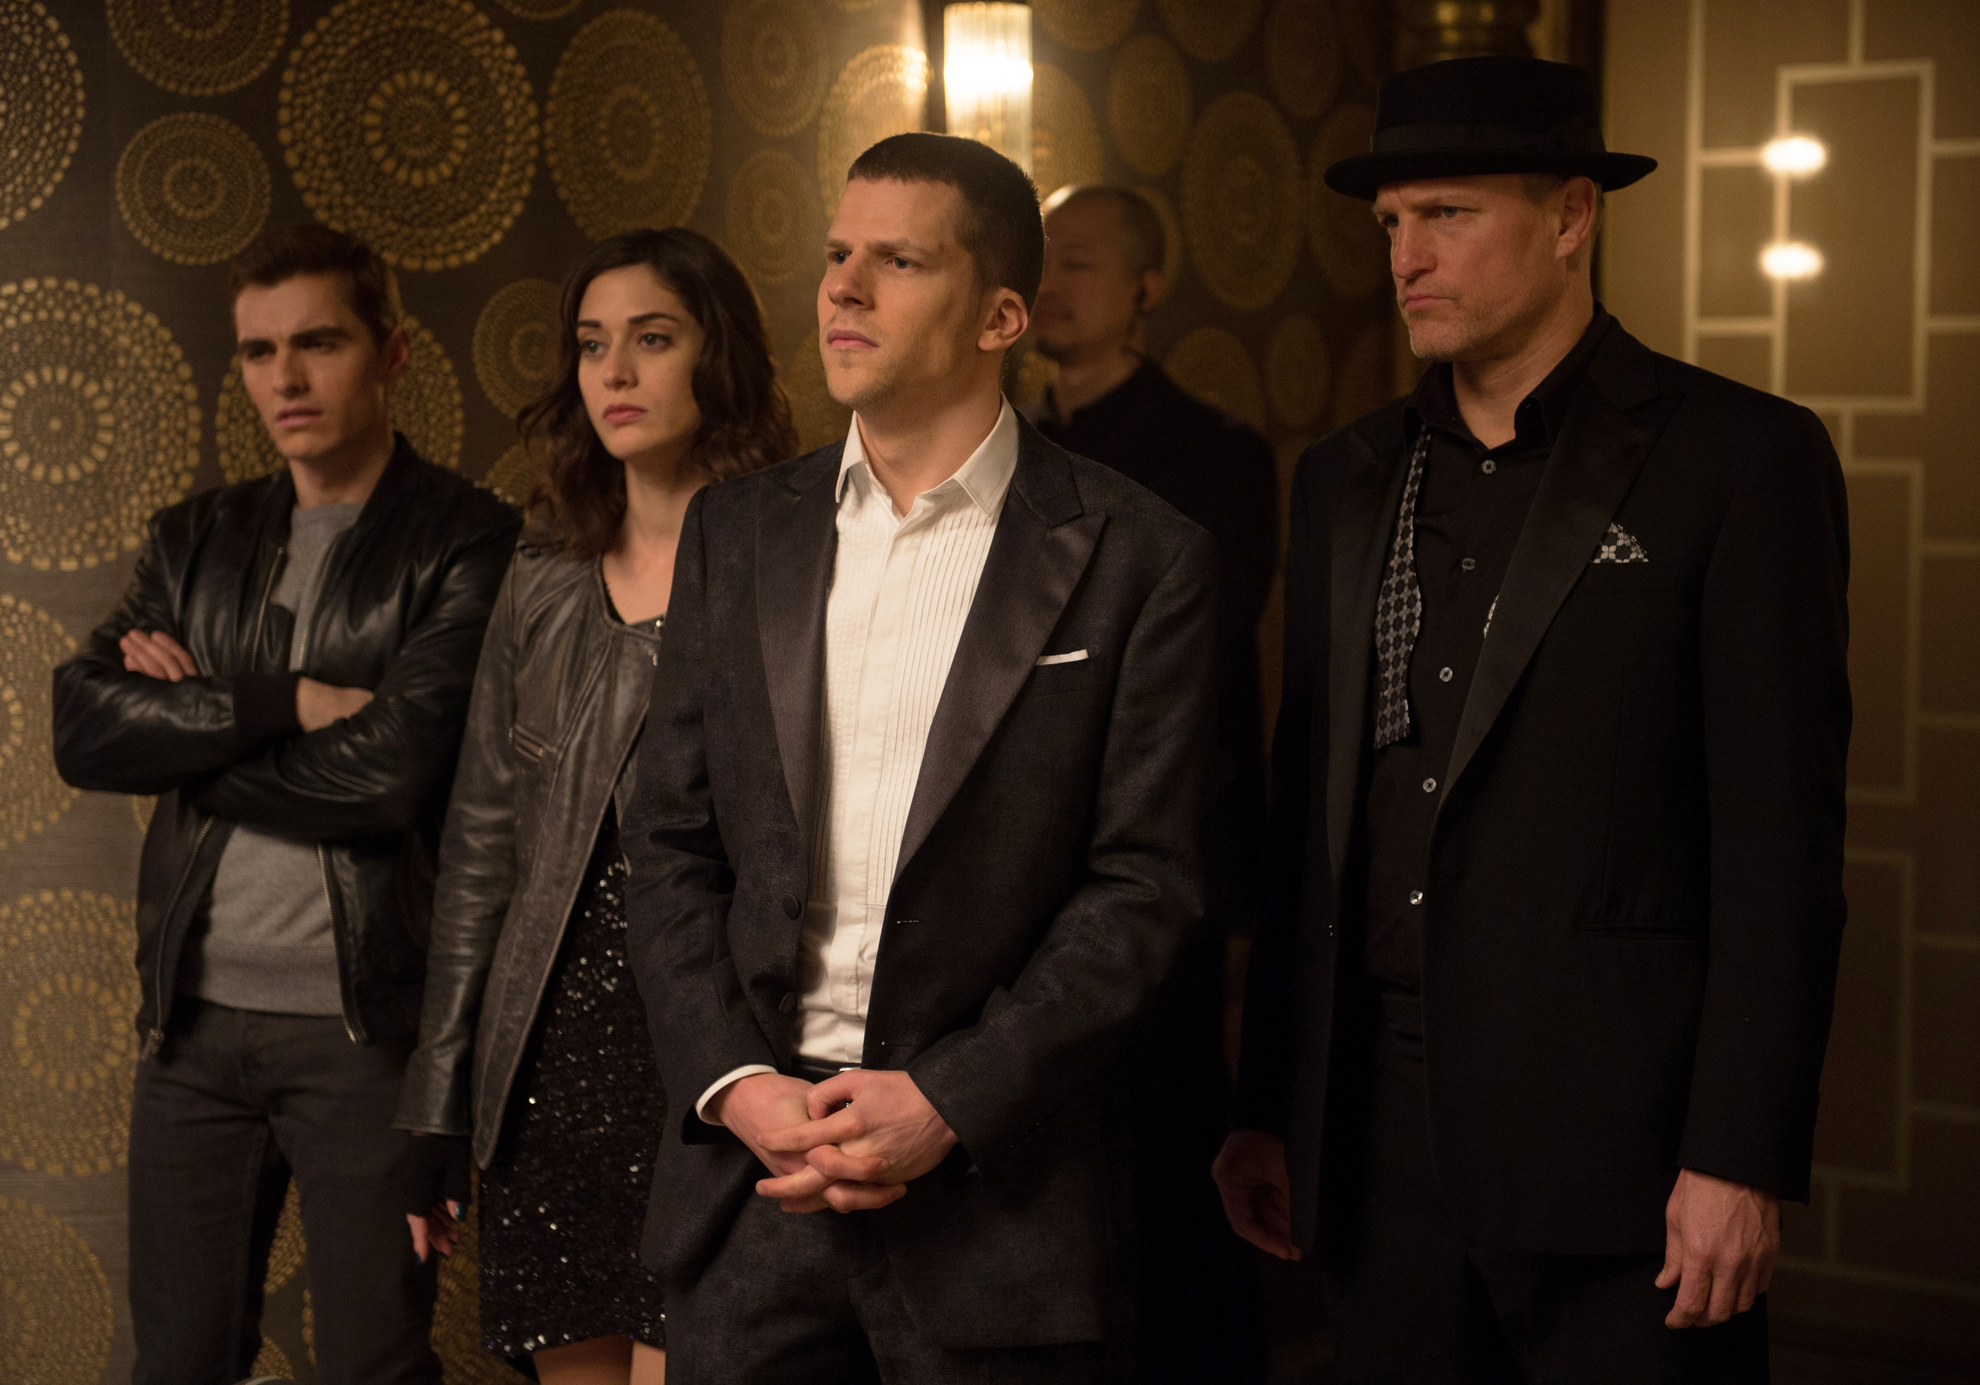 MOVIE REVIEW: Now You See Me 2 (2016)